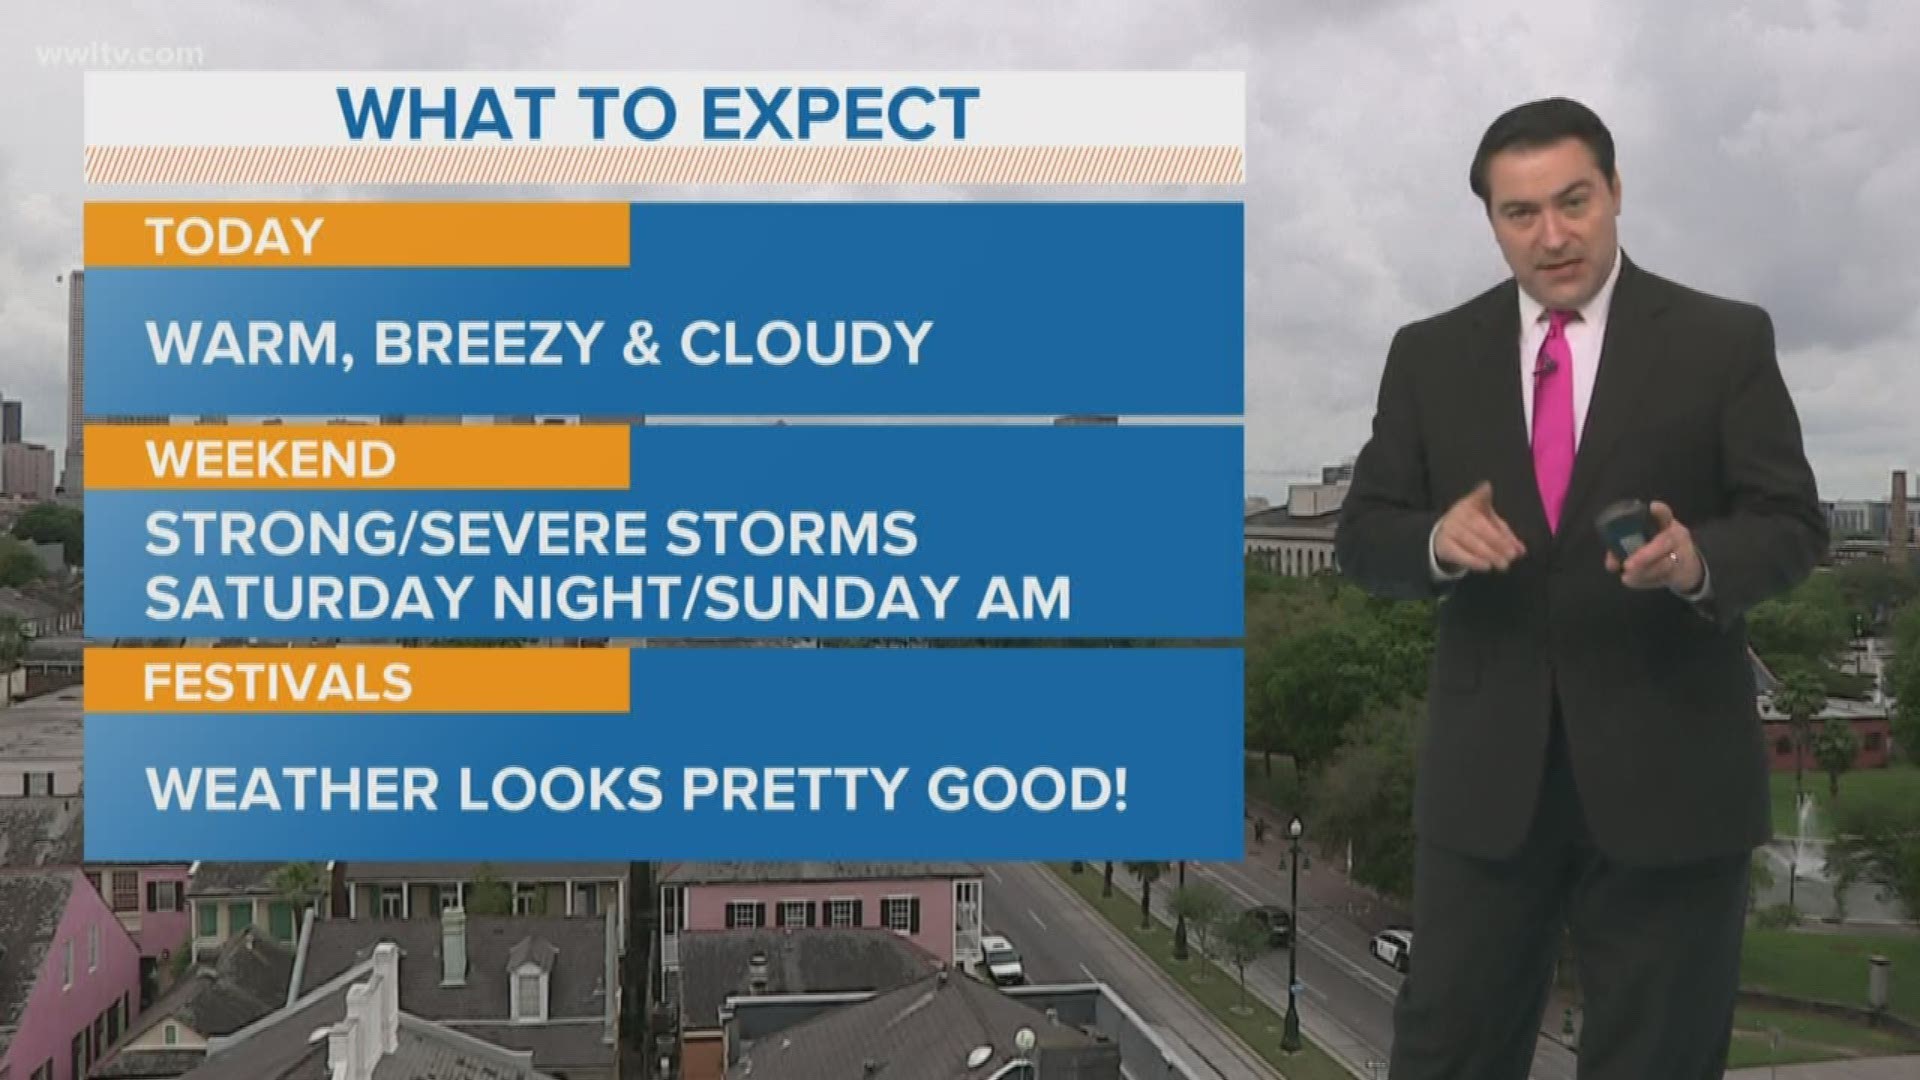 Meteorologist Dave Nussbaum says it will be cloudy and warm today in New Orleans. Then a strong cold front will bring us possible severe weather Saturday Night into Sunday Morning.